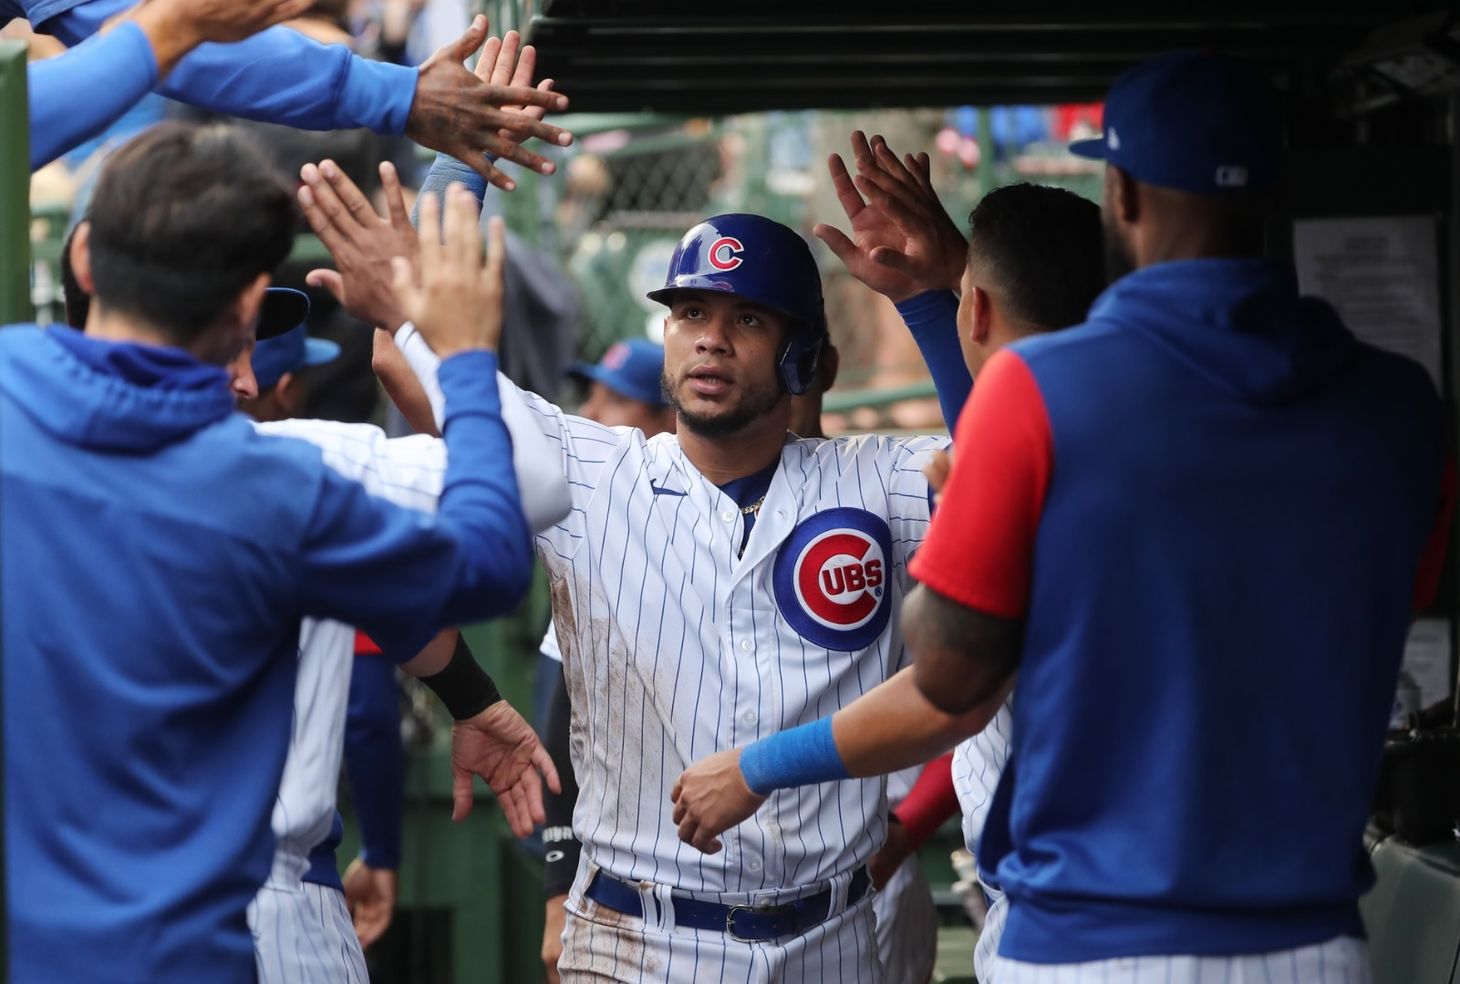 Hoerner gets 3 hits as Cubs stop slide by topping Mets 3-2